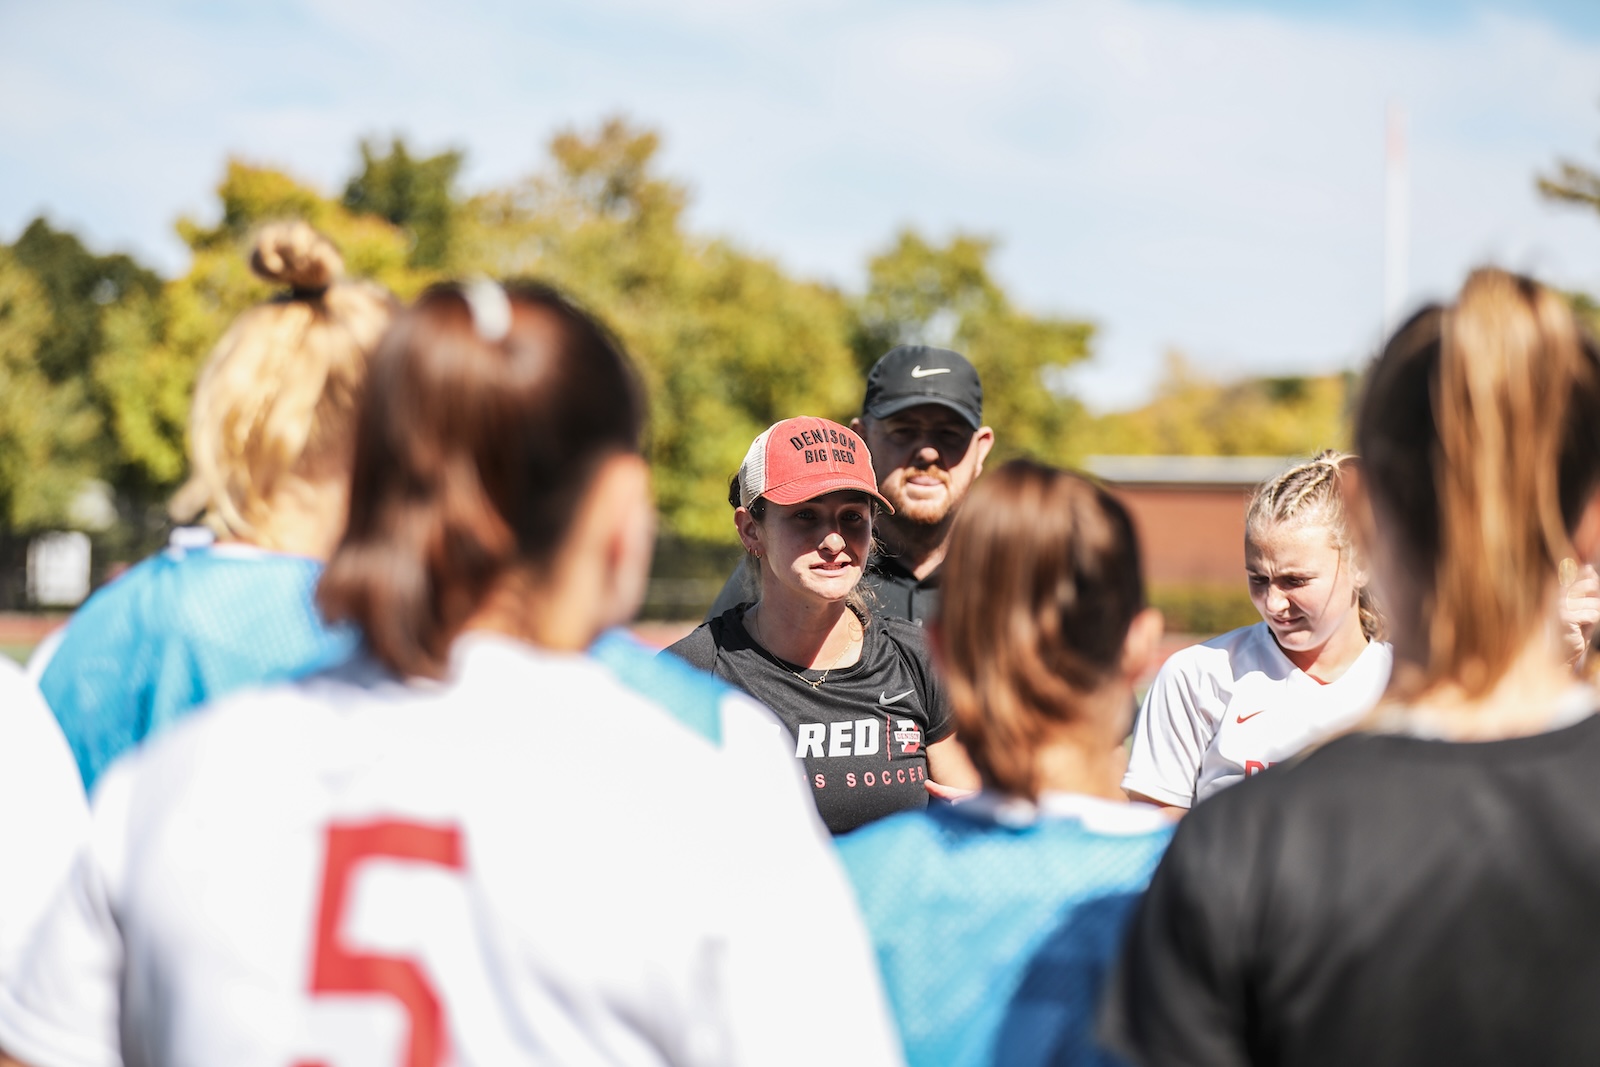 Sarah Brink led the womens soccer team to an NCAC tournament title in her first year at the helm. (Lilly Rennie)